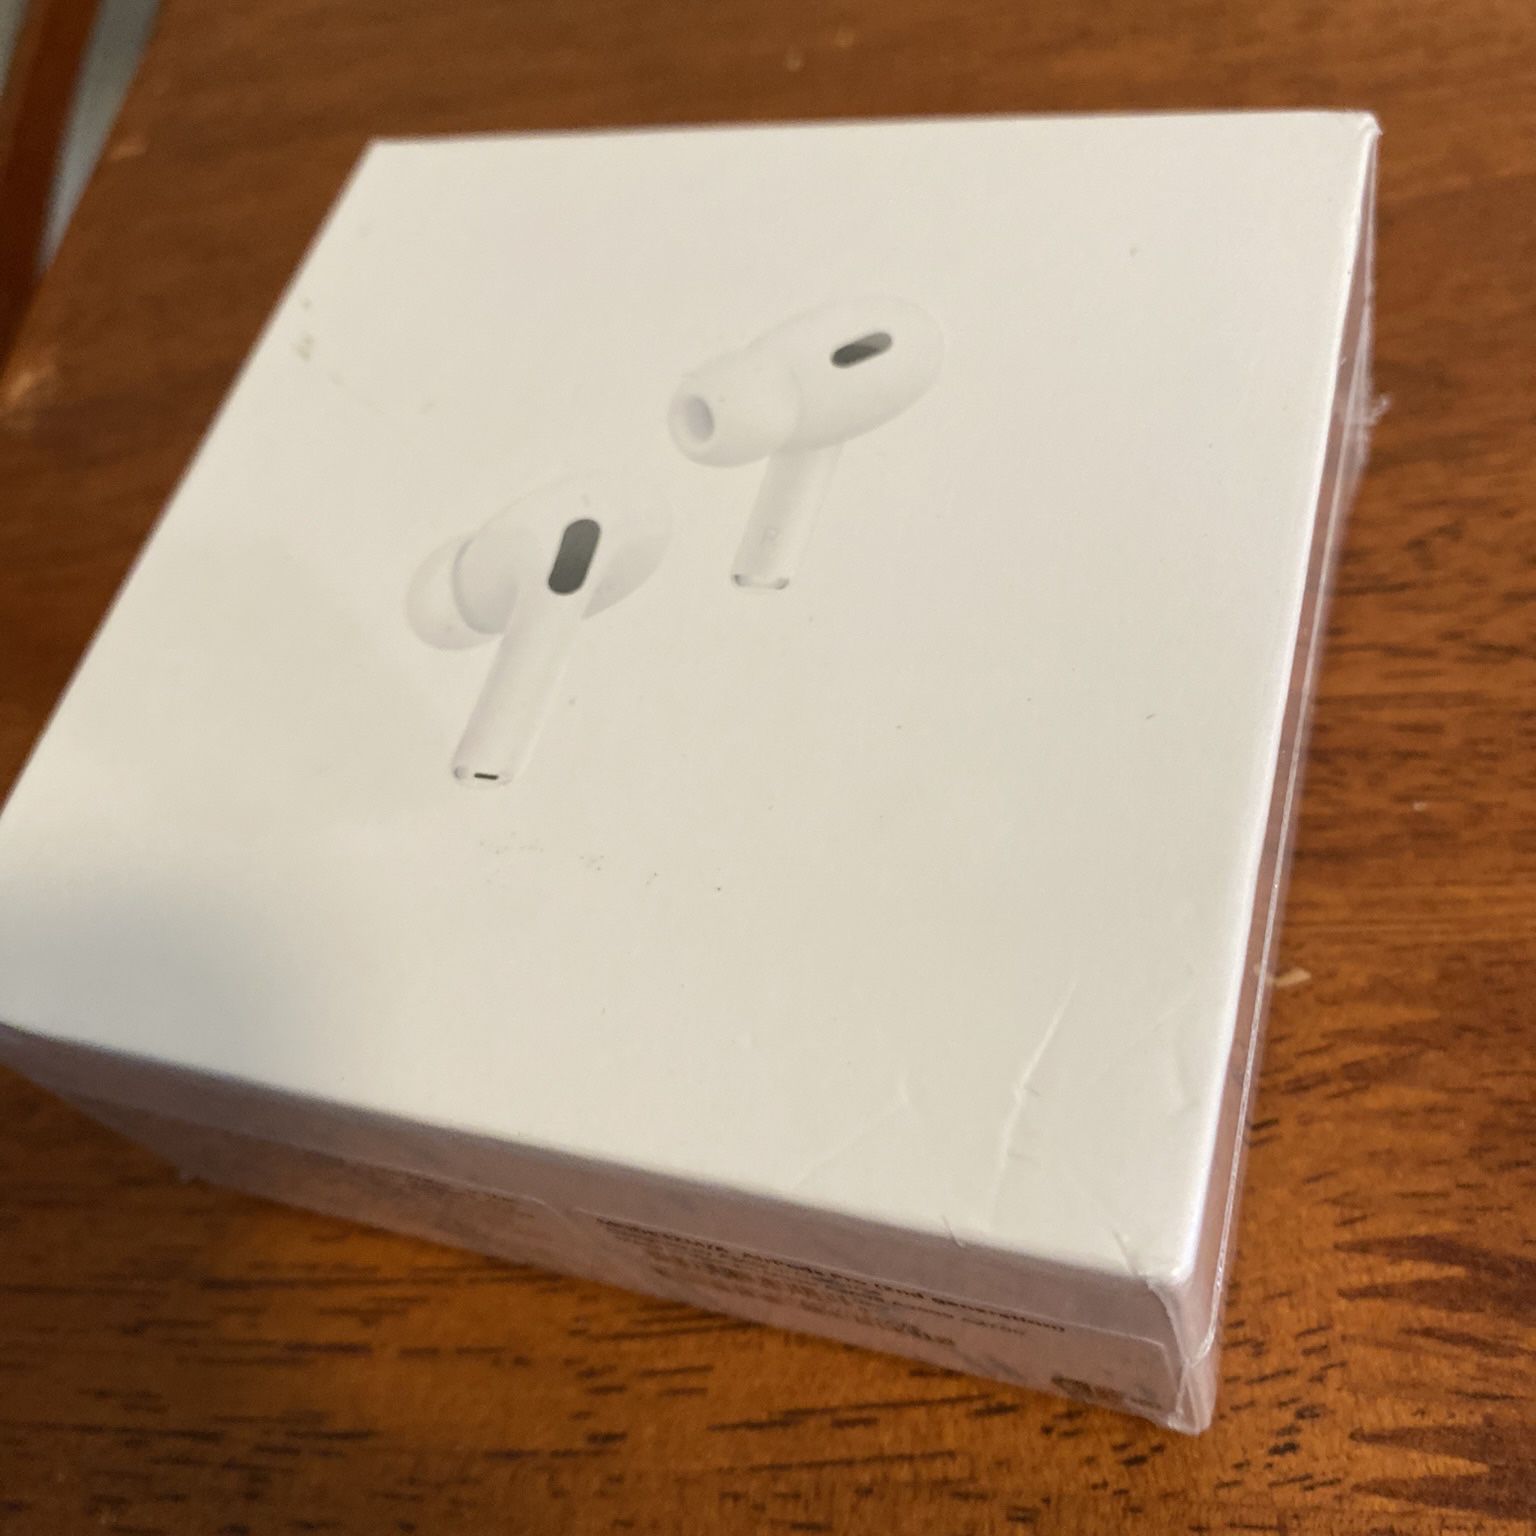 Airpod Pros 2nd Generation (APPLE WARRANTY INCLUDED)